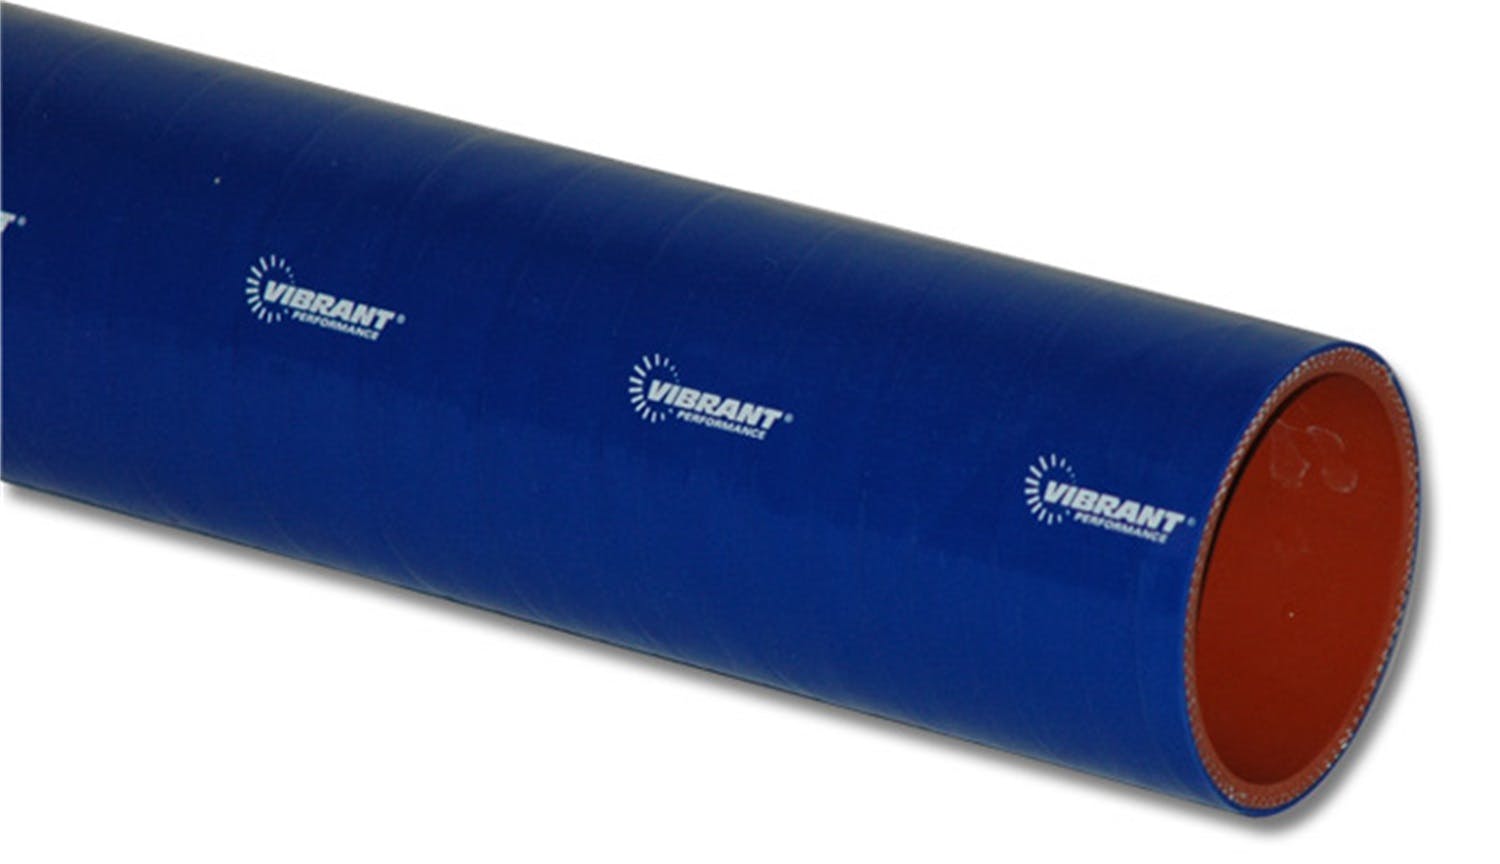 Vibrant Performance 27051B 4 Ply Silicone Sleeve, 1.75 inch I.D. x 12 inch Long - Blue